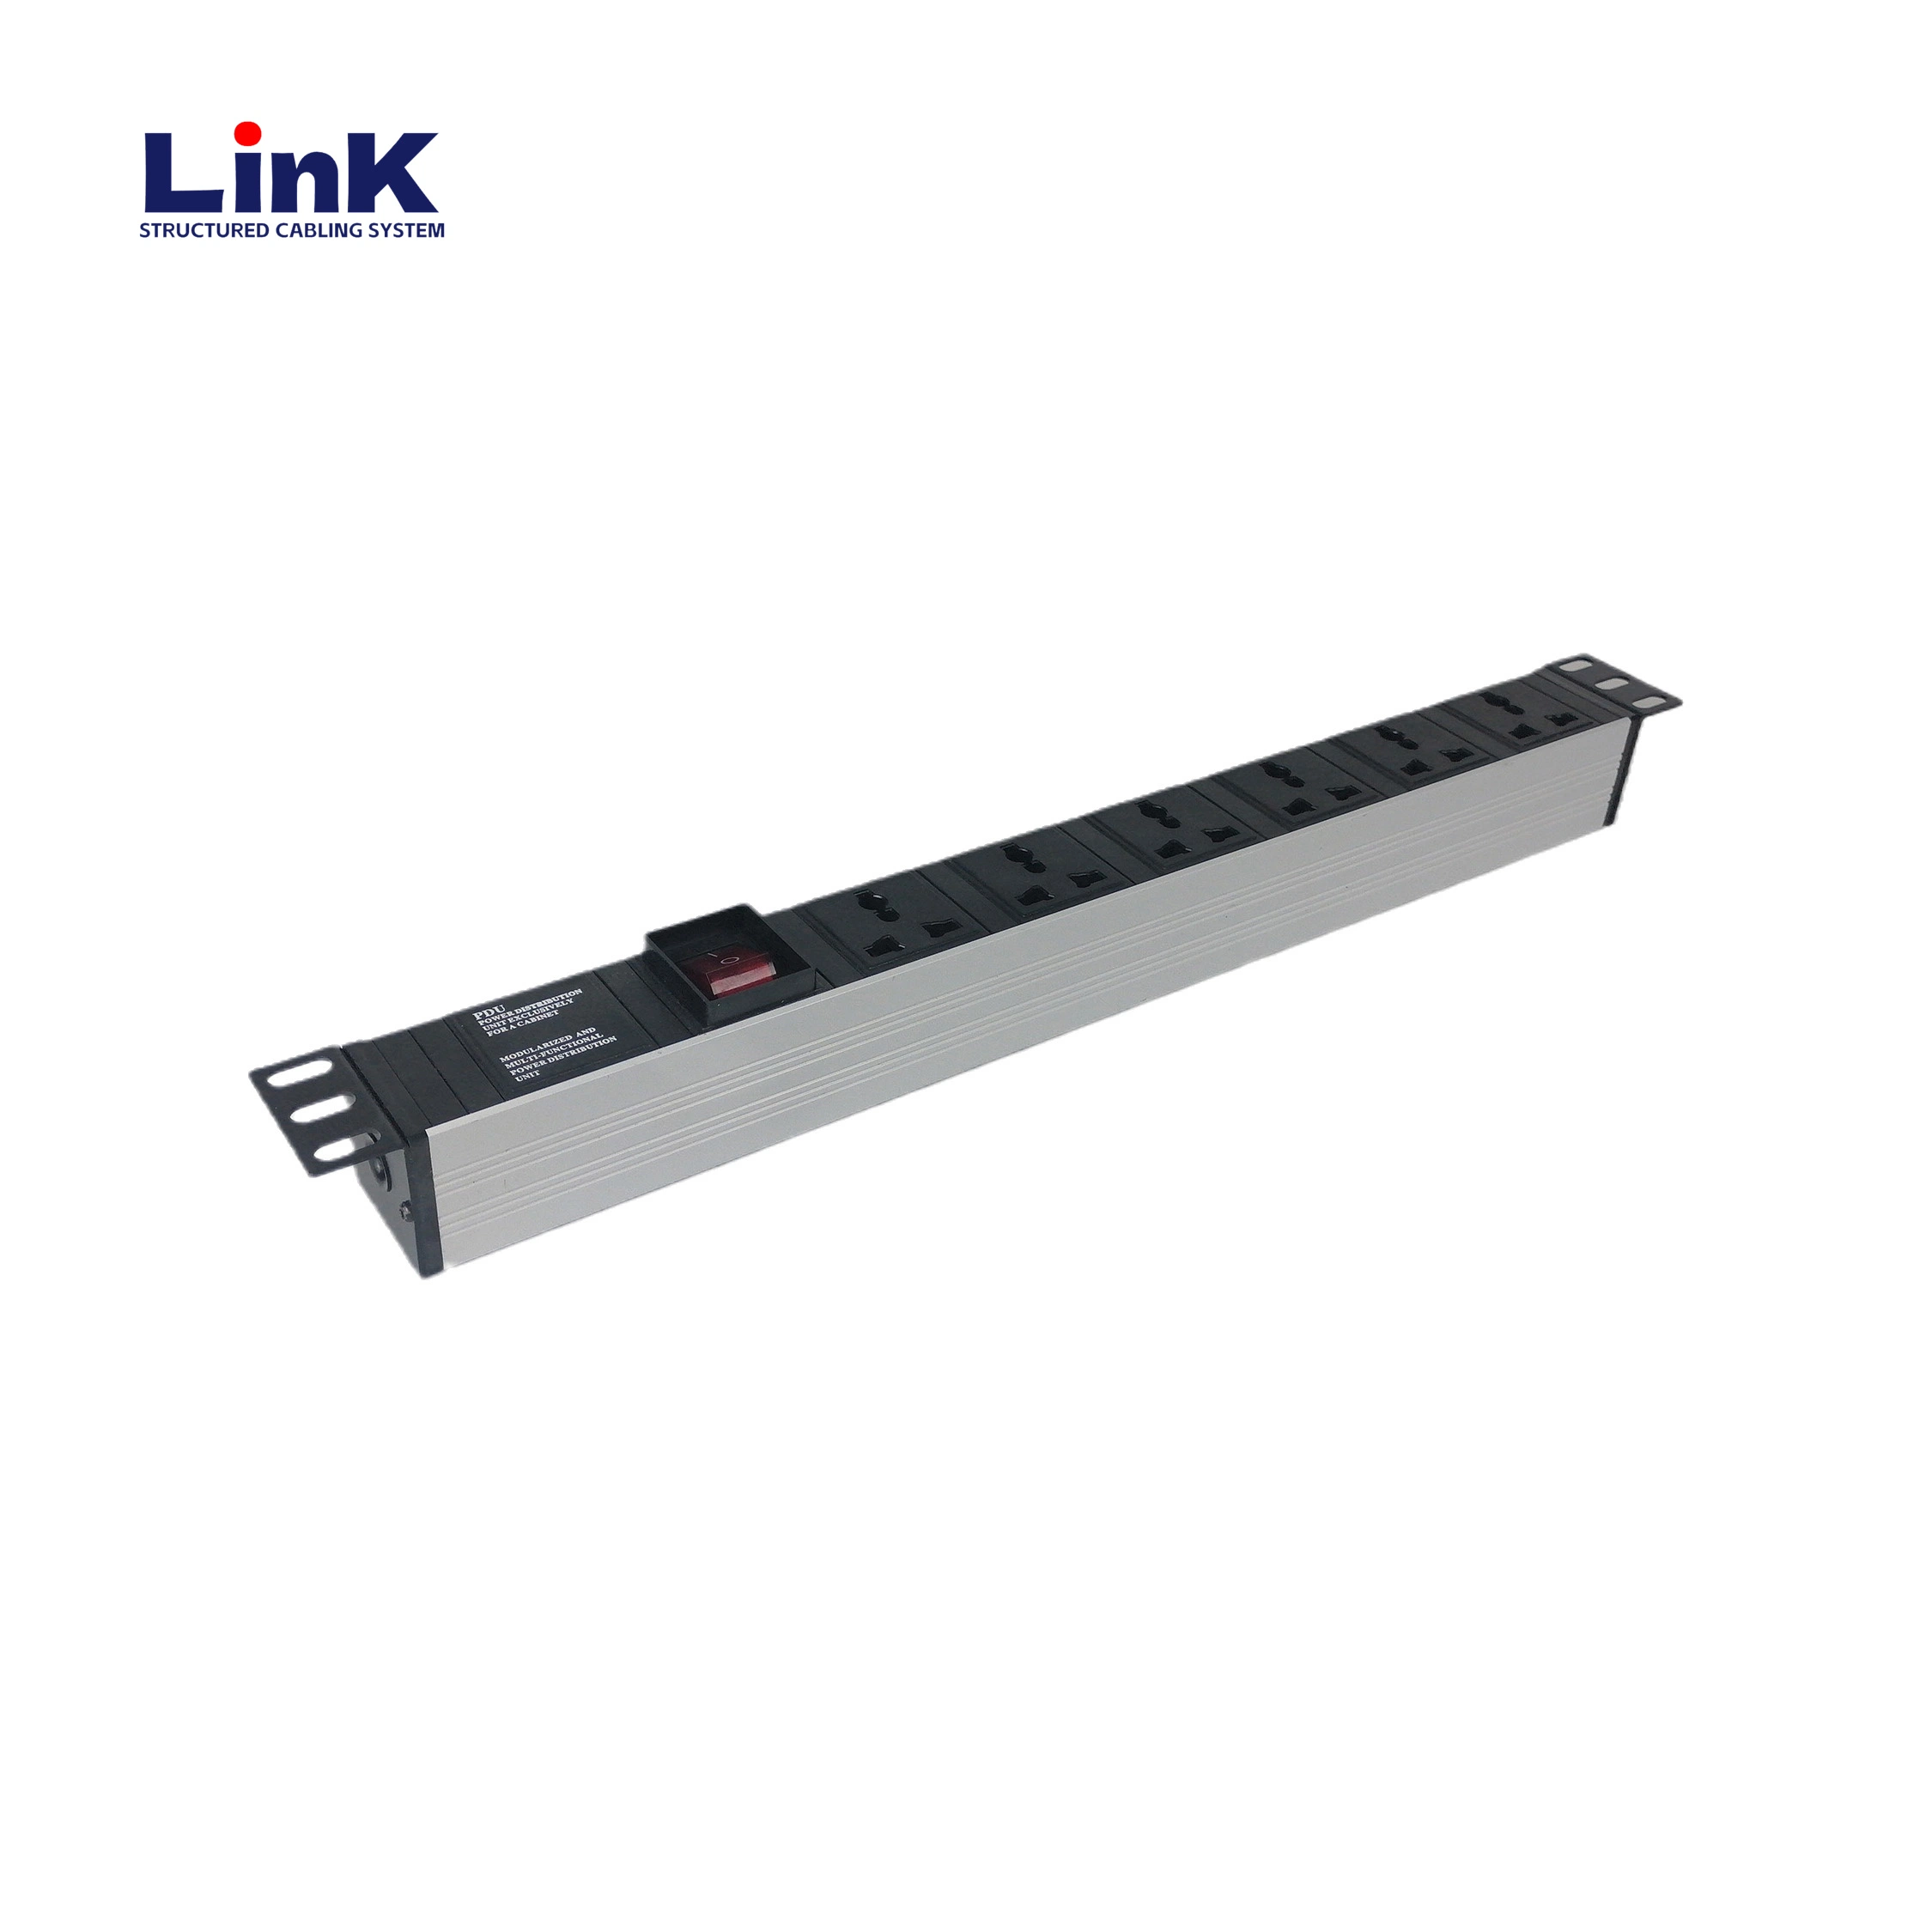 Low Profile Rack-Mounted PDU with Circuit Breaker and Six Outlets